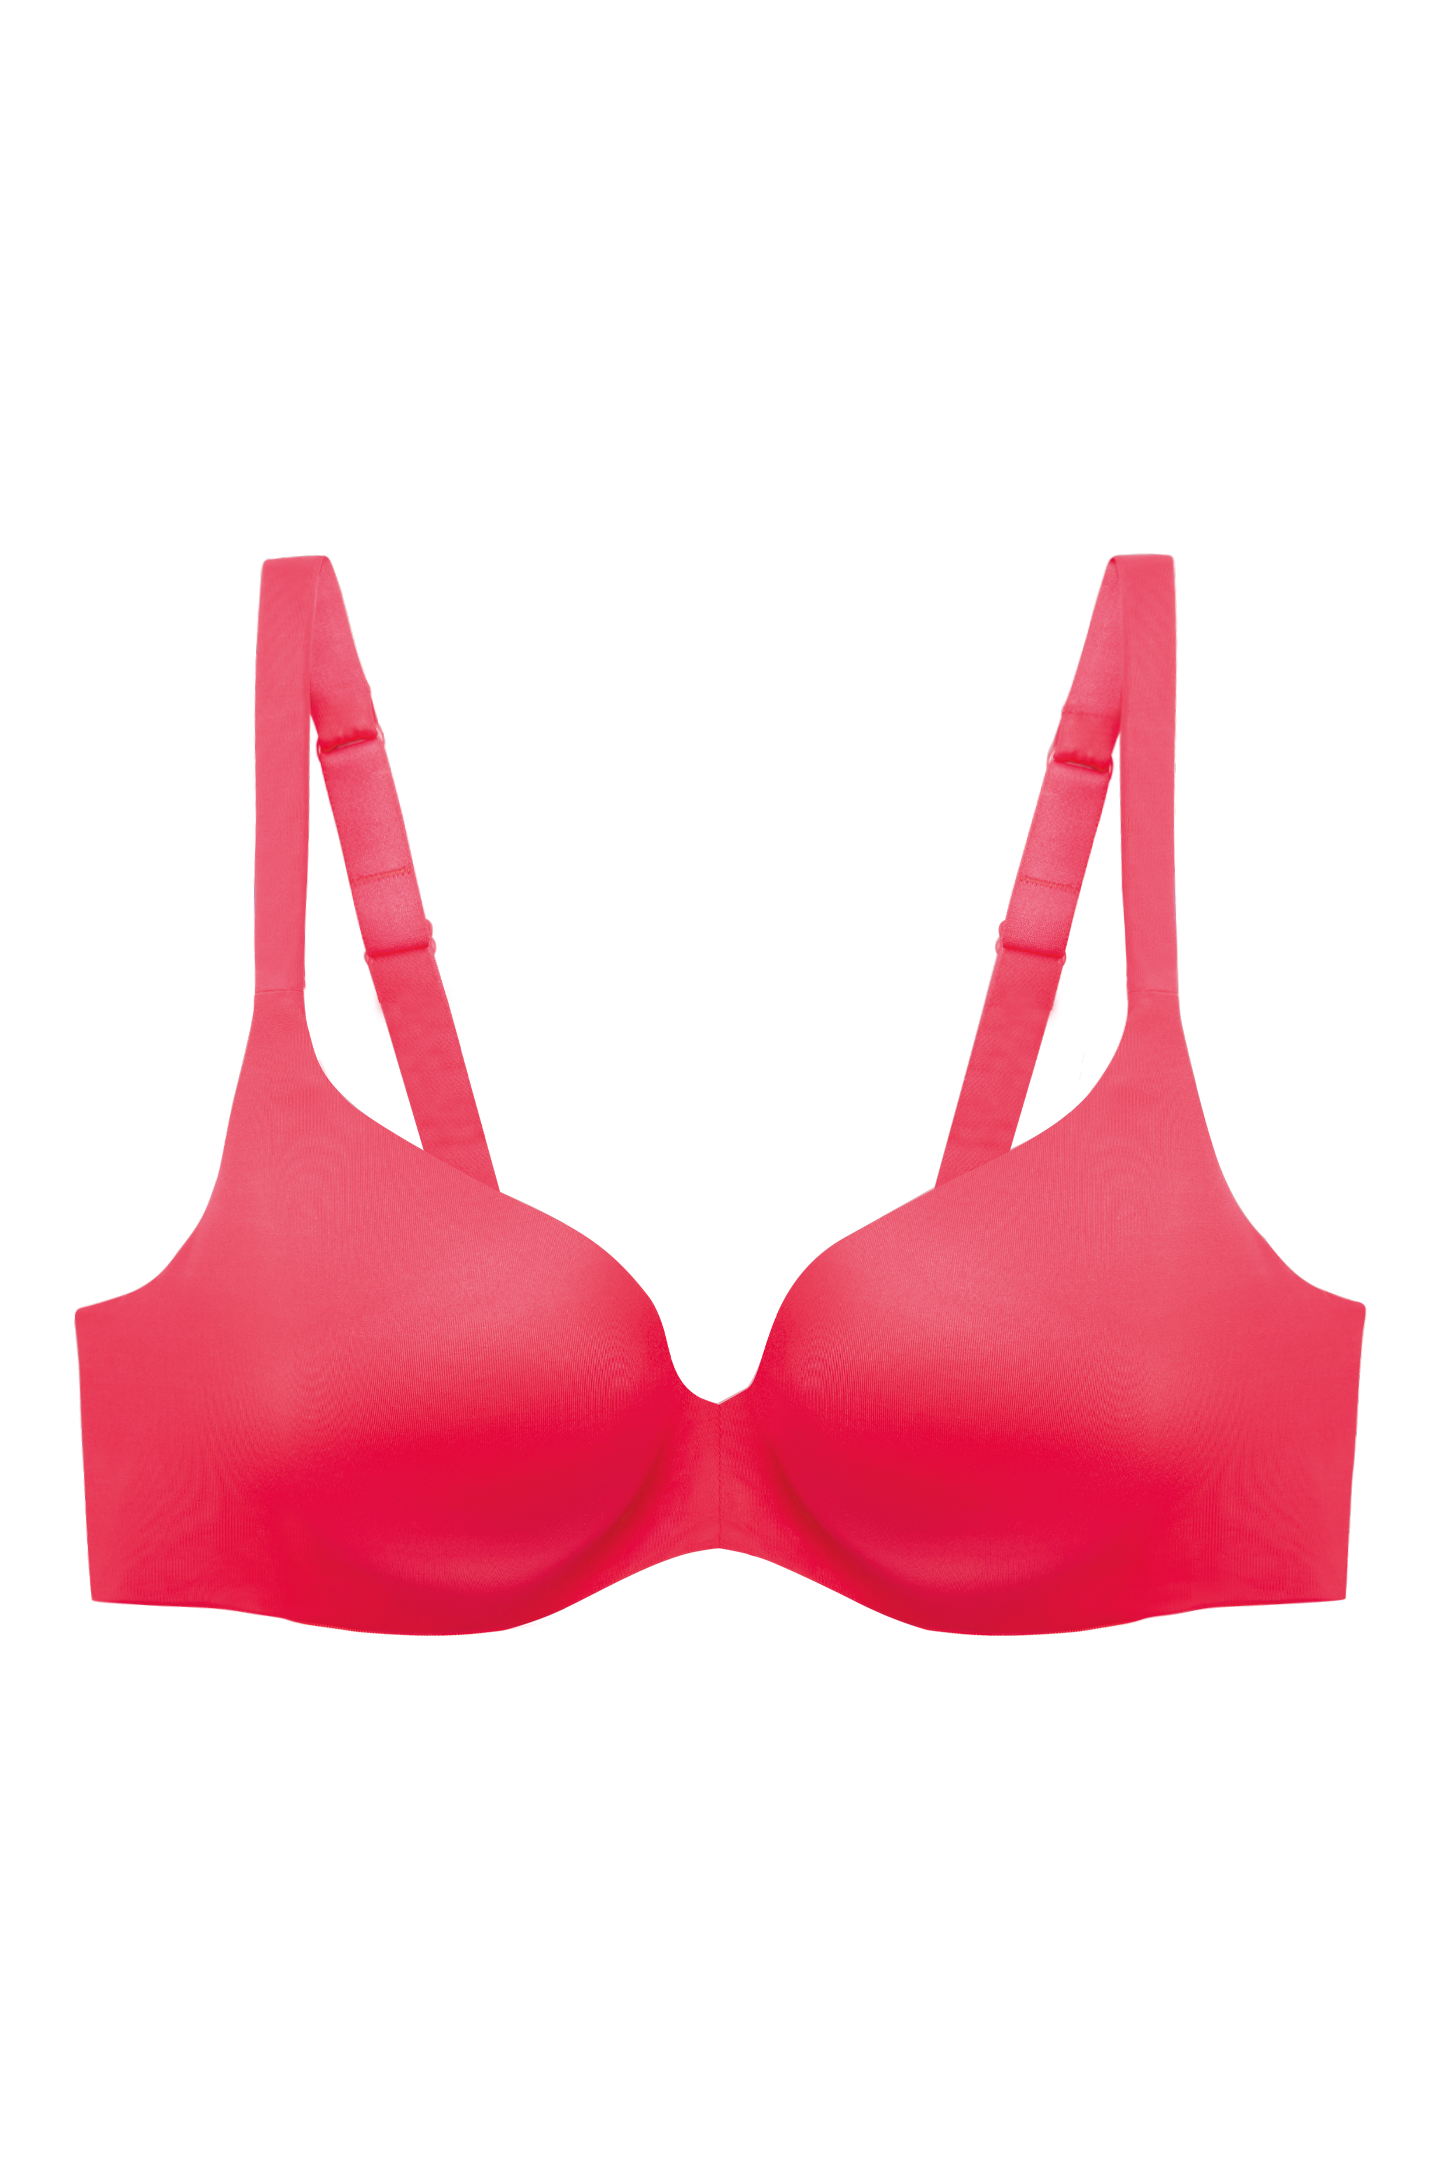 Buy Victoria's Secret Smooth Plunge Push Up Bra from the